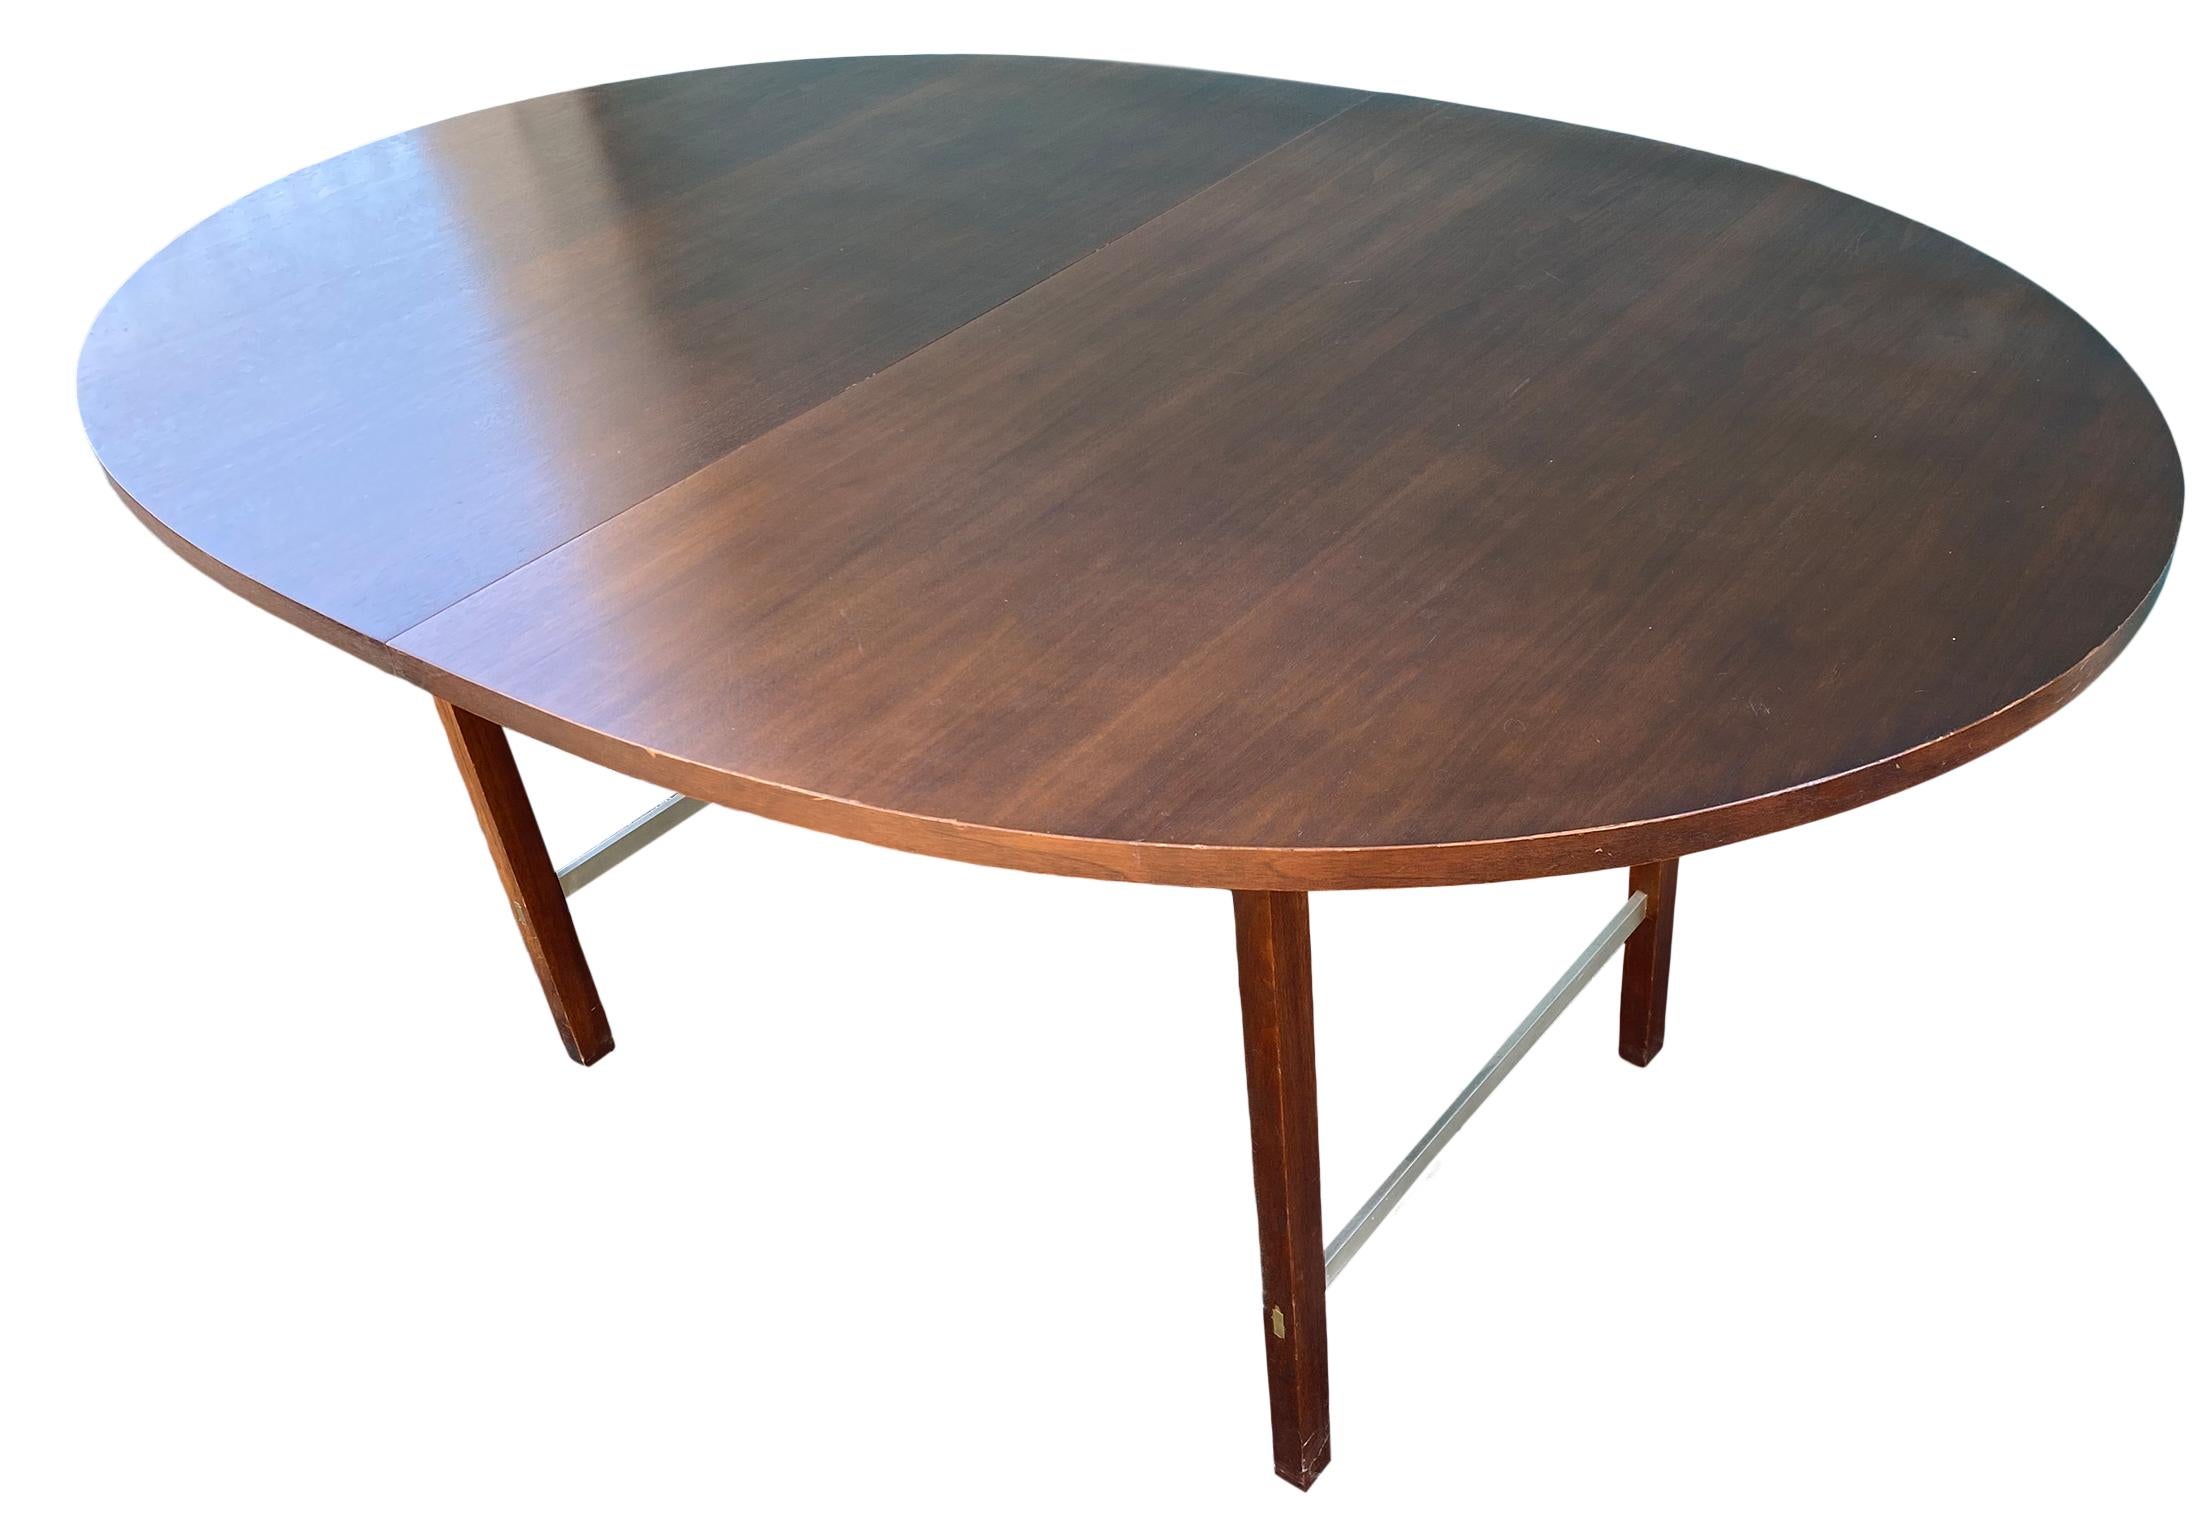 A Mid-Century Modern walnut extension dining table designed by Paul McCobb for Calvin Furniture. The table features dark walnut wood grain and aluminum stretchers. The table is in original vintage condition. Great Design.

Measures: 62